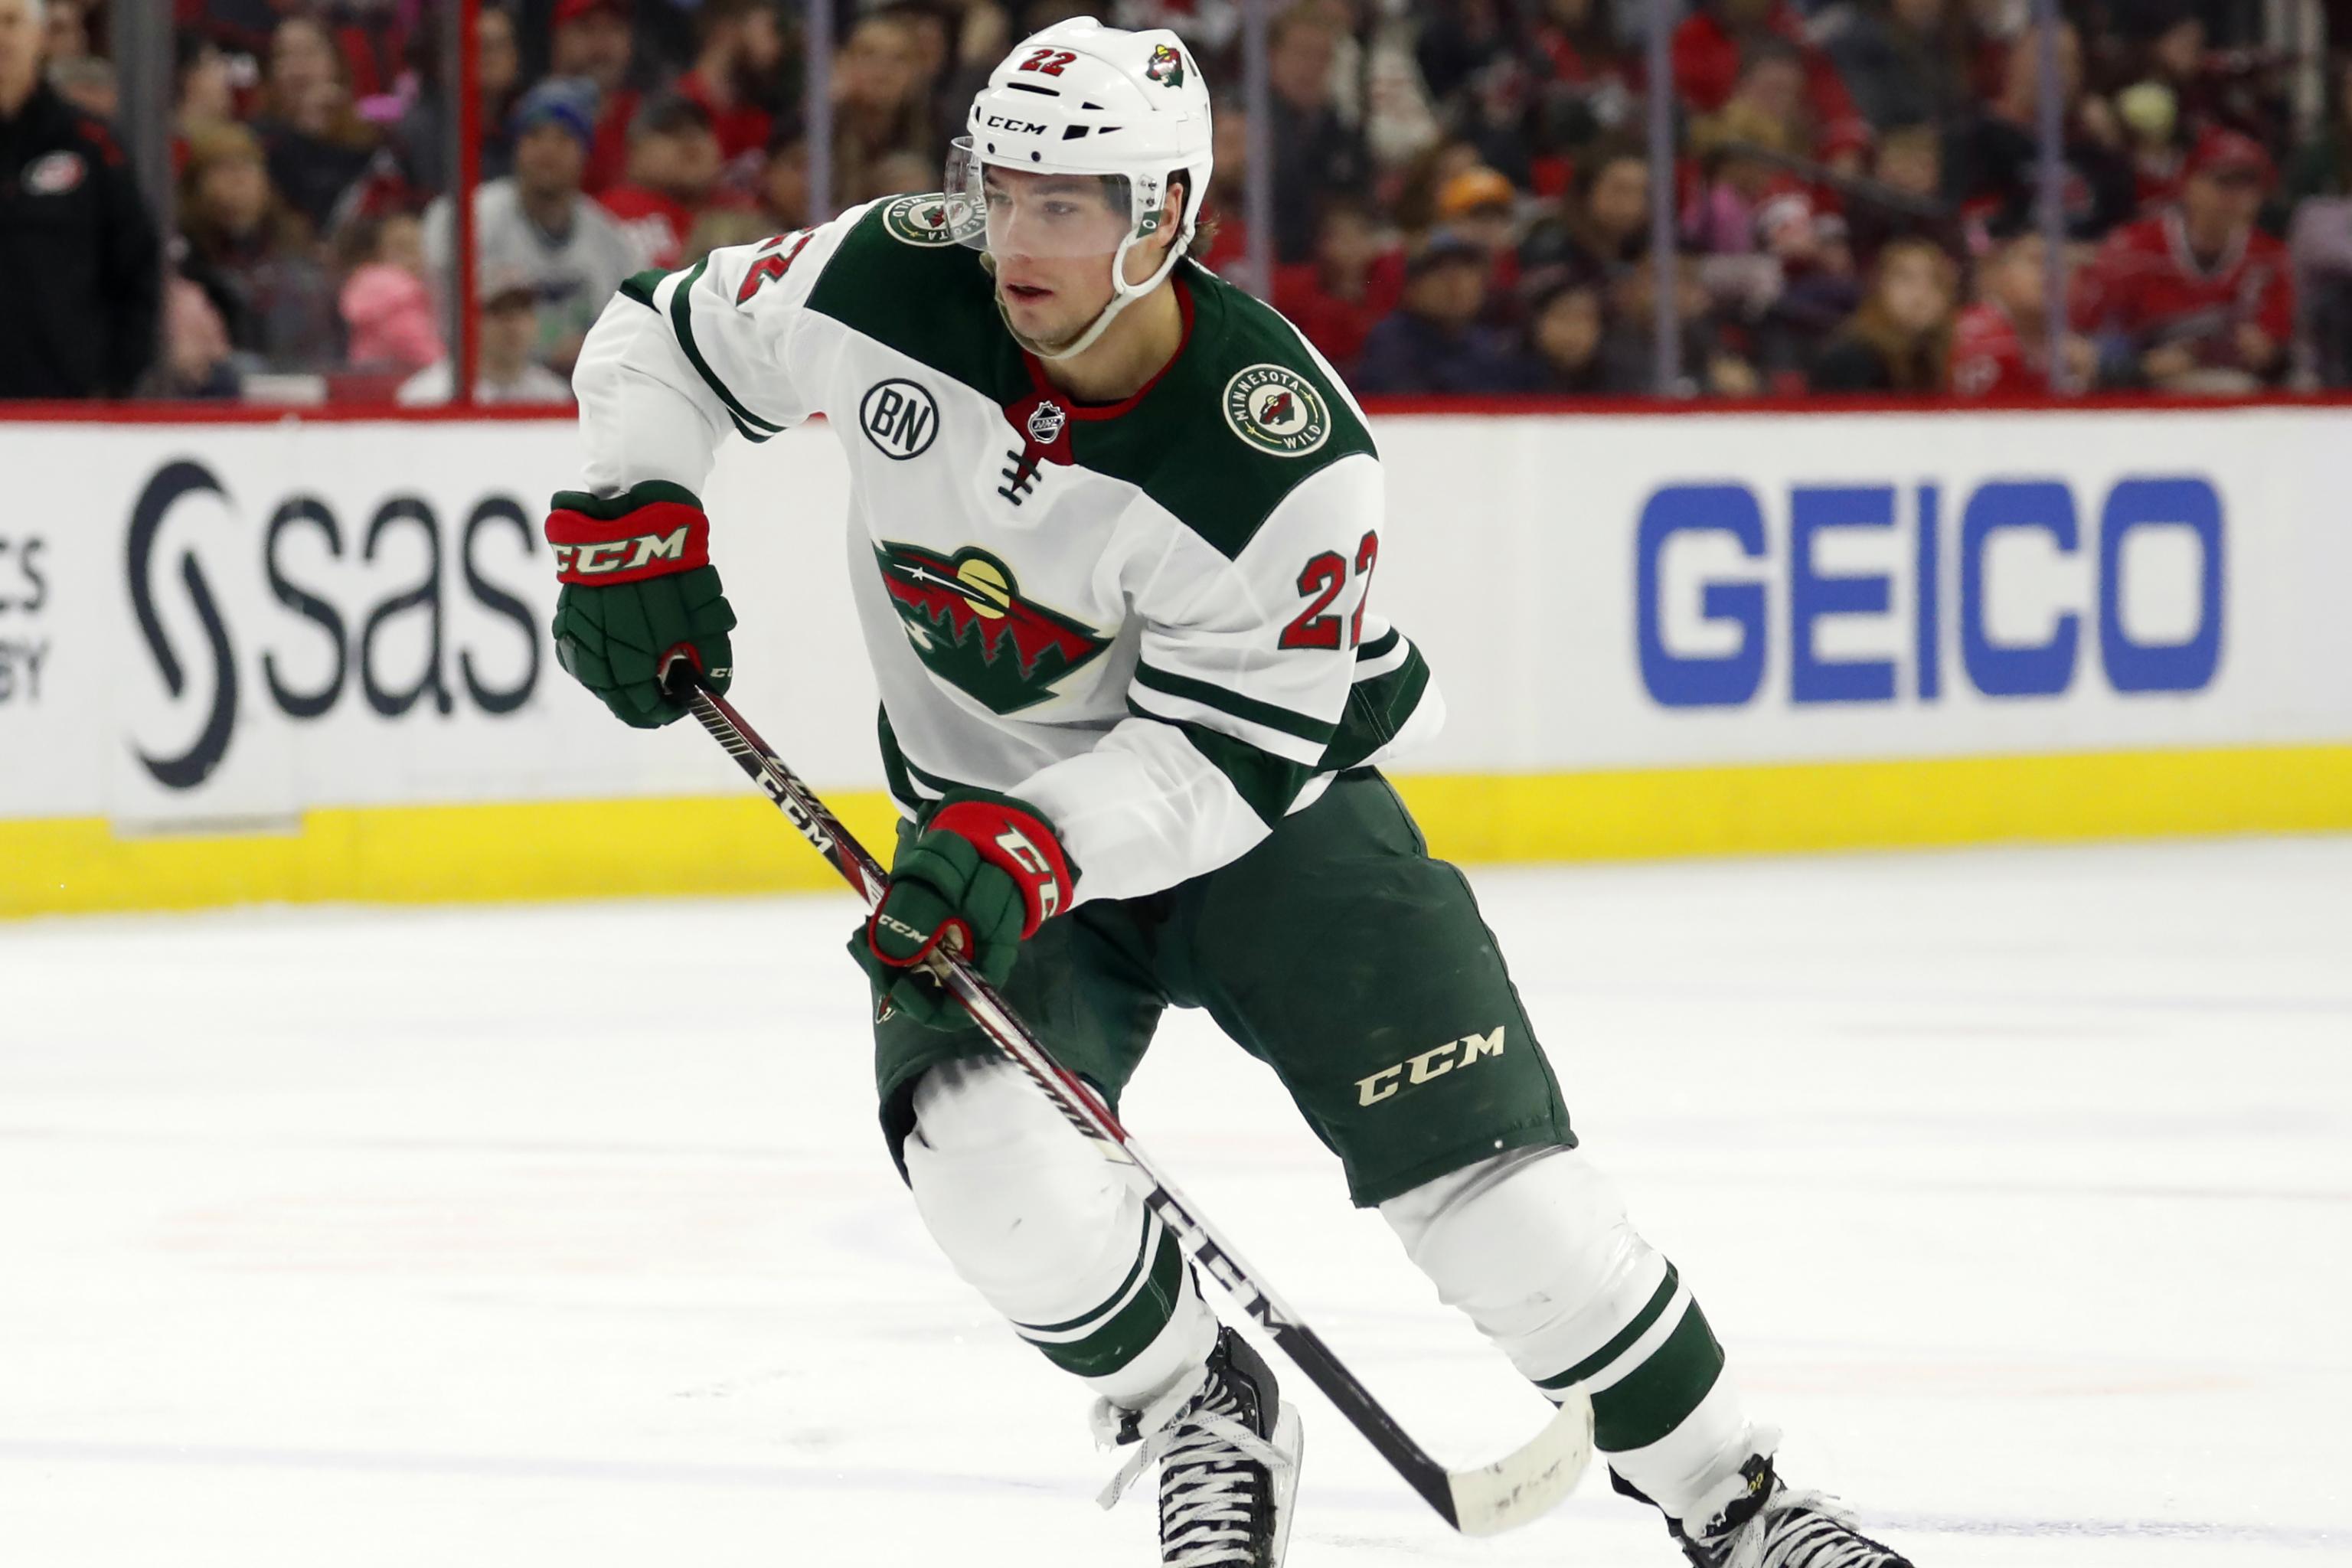 Minnesota Wild forward Kevin Fiala gets three-game suspension for